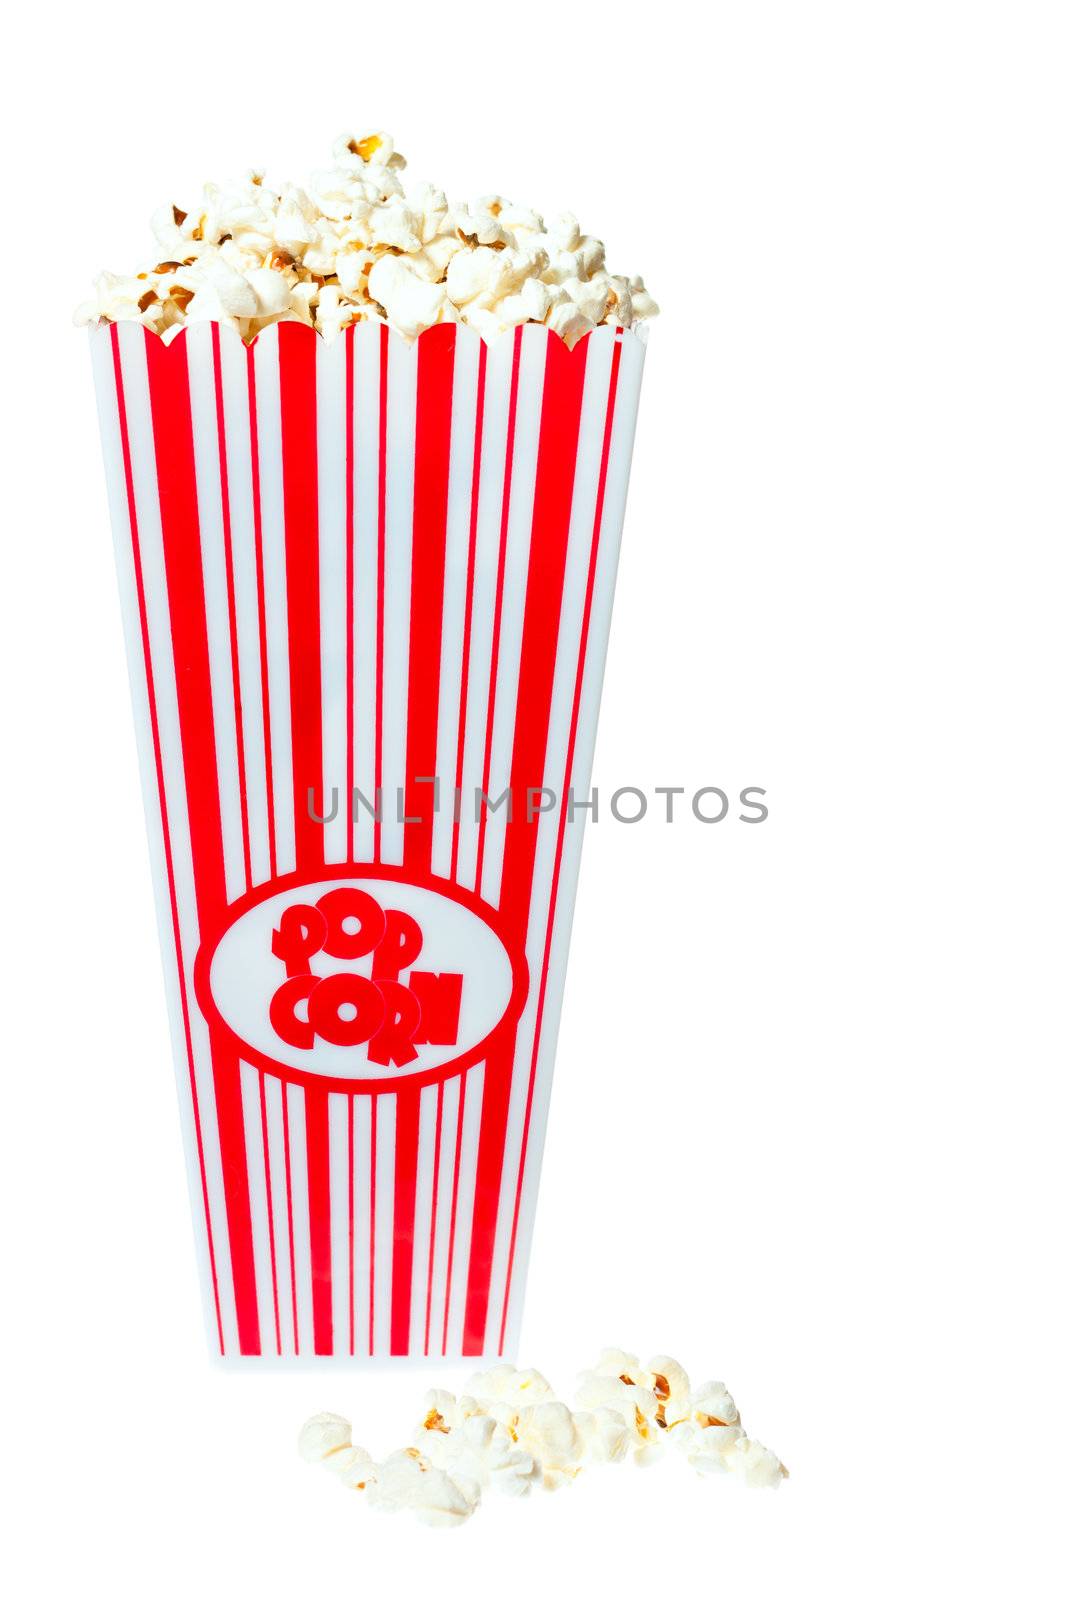 Popcorn tub overflowing with fresh delicious popcorn. Isolated on white